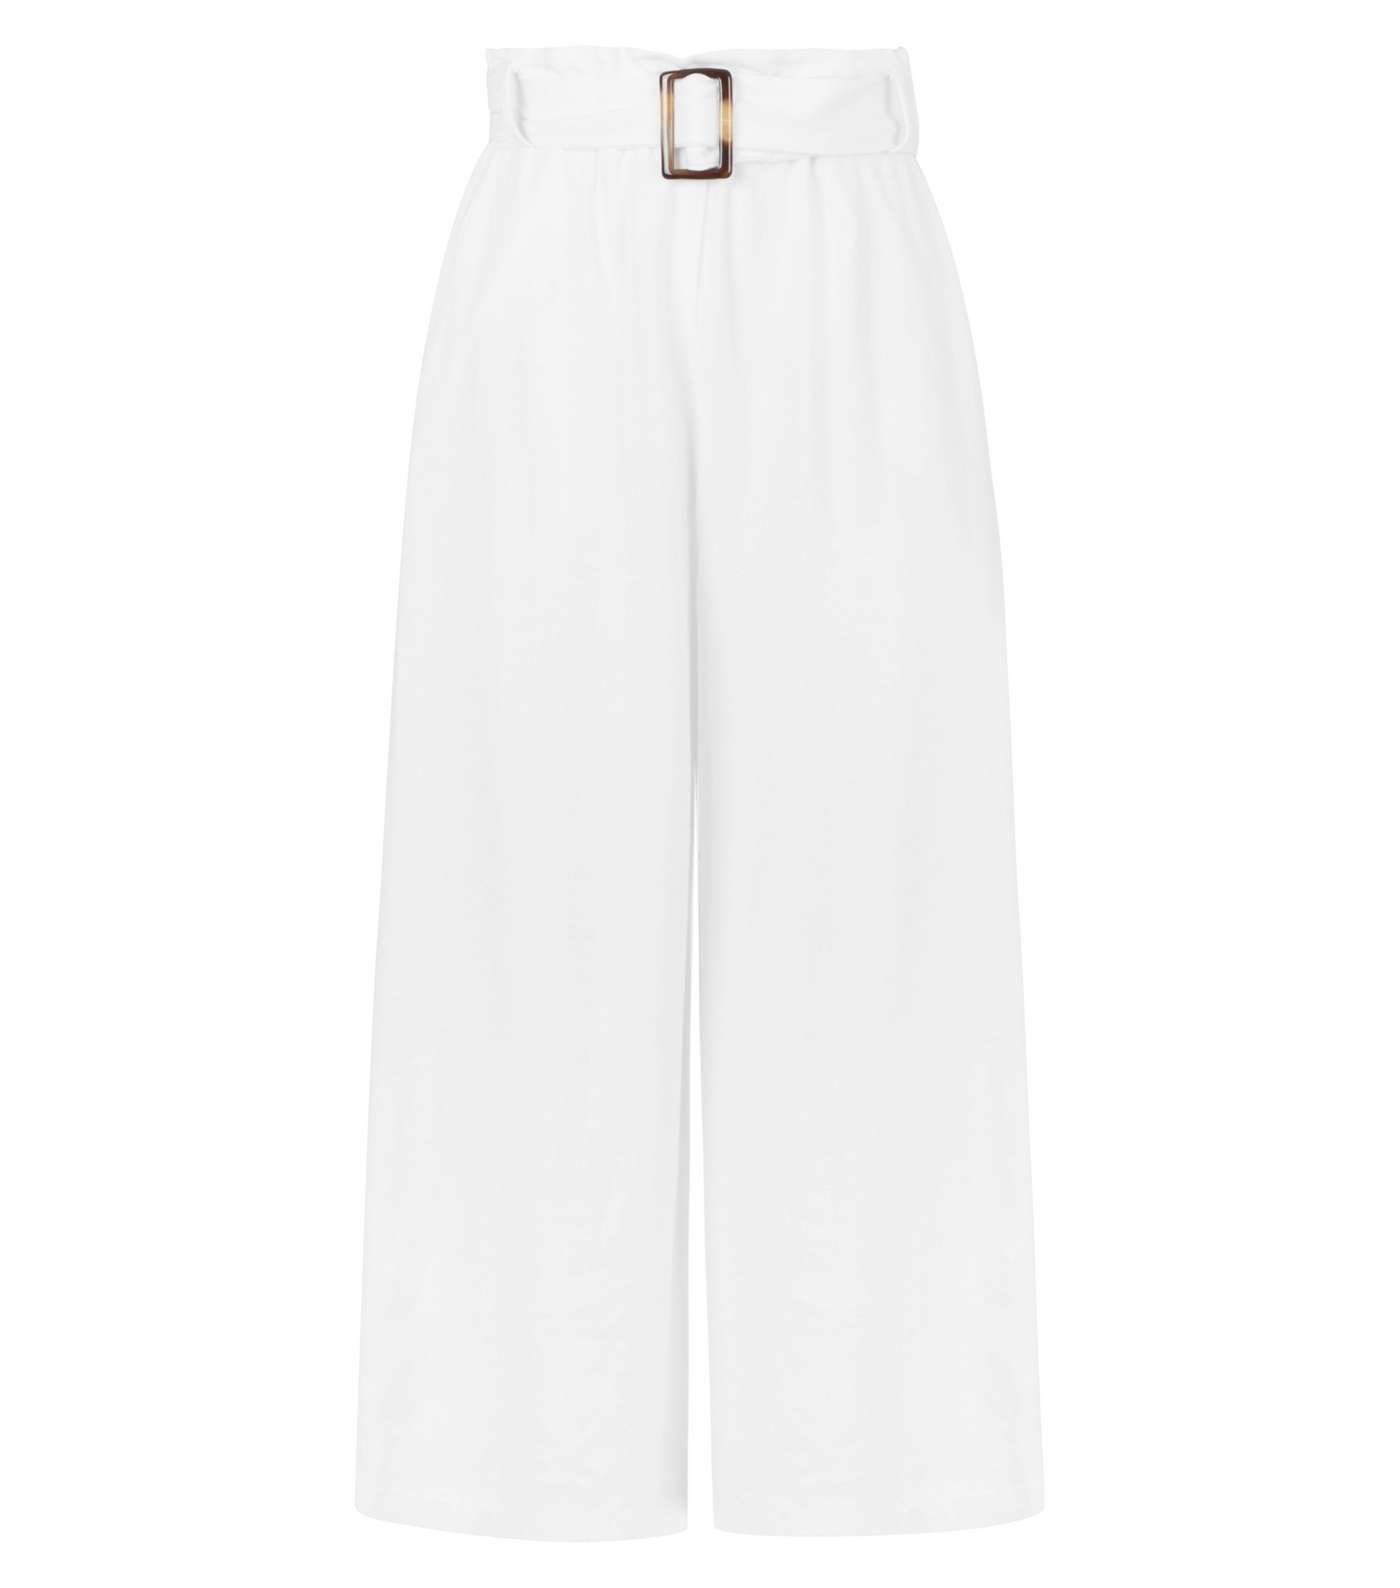 White Linen-Look Belted Culottes Image 4